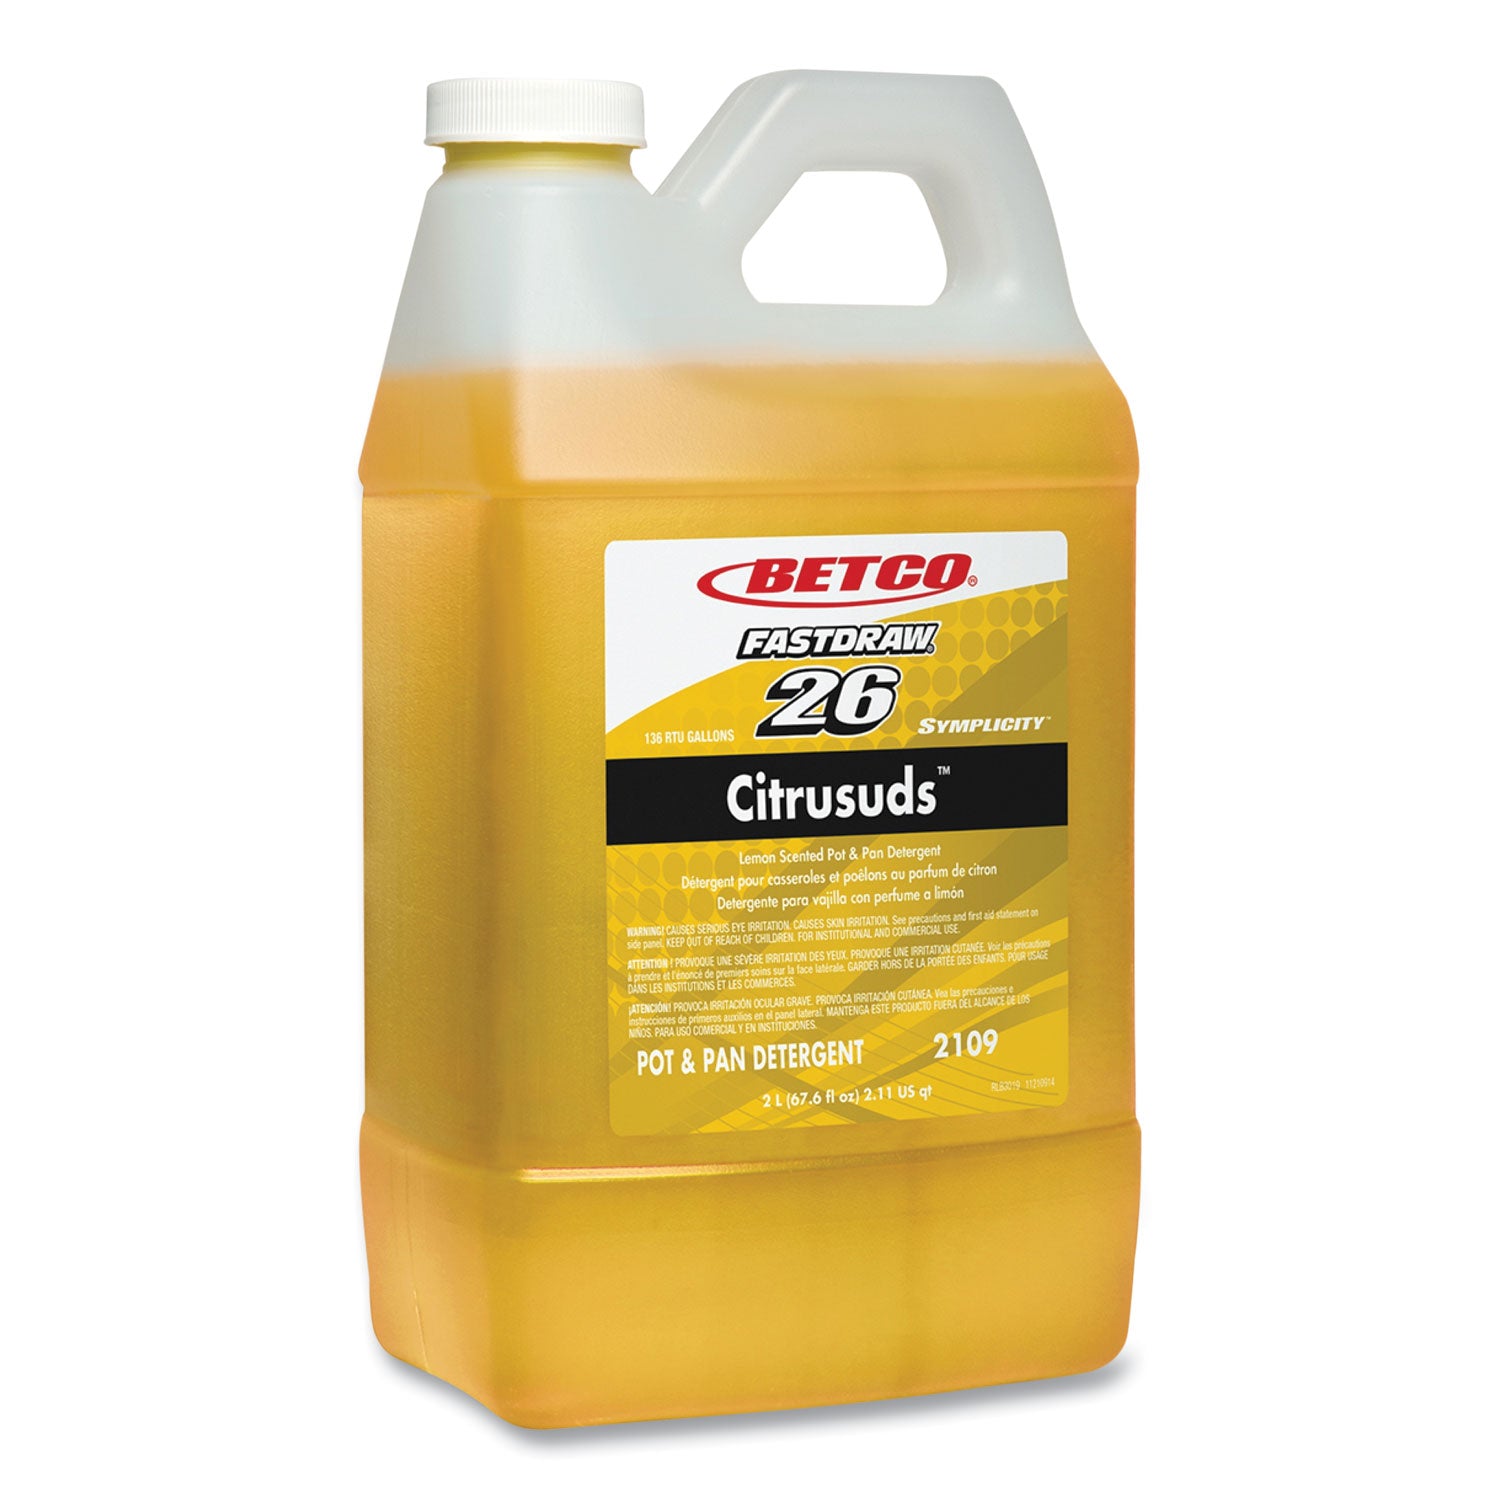 Betco Symplicity Citrusuds Pot/Pan Detergent - FASTDRAW 26 - Concentrate - 67.6 fl oz (2.1 quart) - Lemon Scent - 1 Each - Heavy Duty, Long Lasting, Spill Proof, Phosphate-free - Yellow - 1